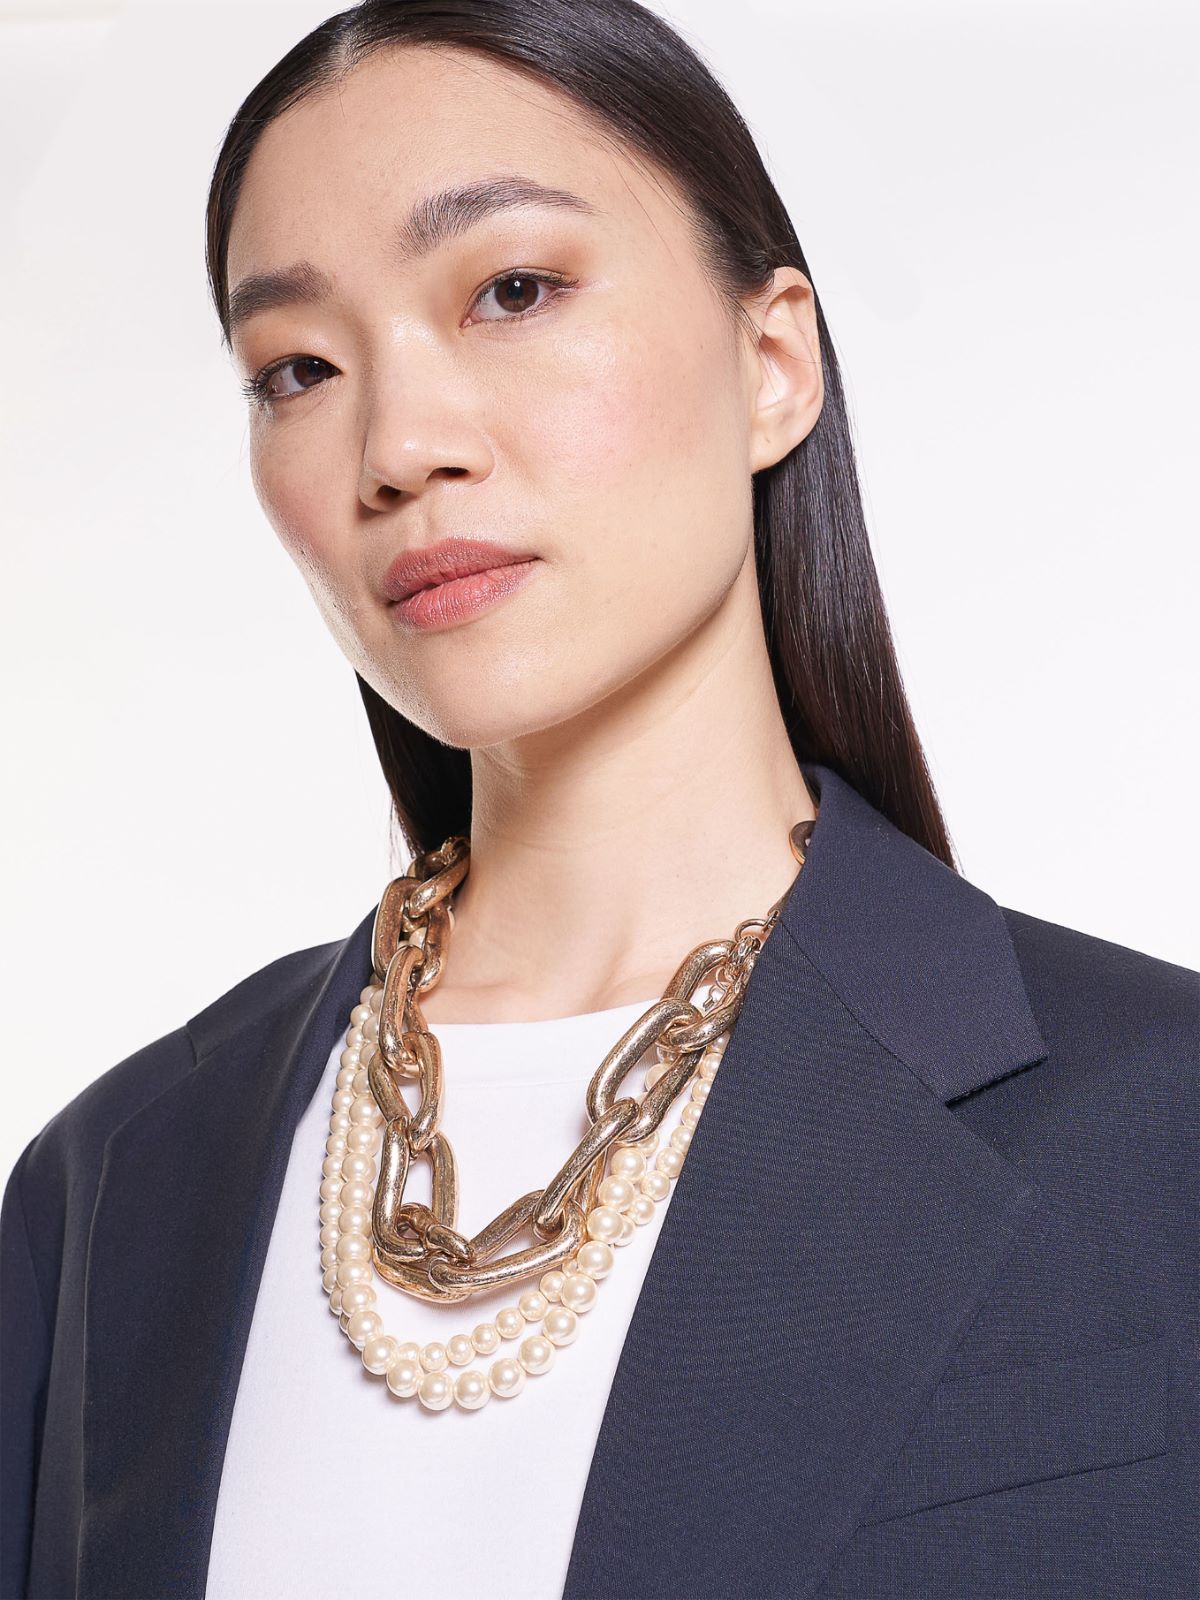 Metal and resin necklace - GOLD - Weekend Max Mara - 3